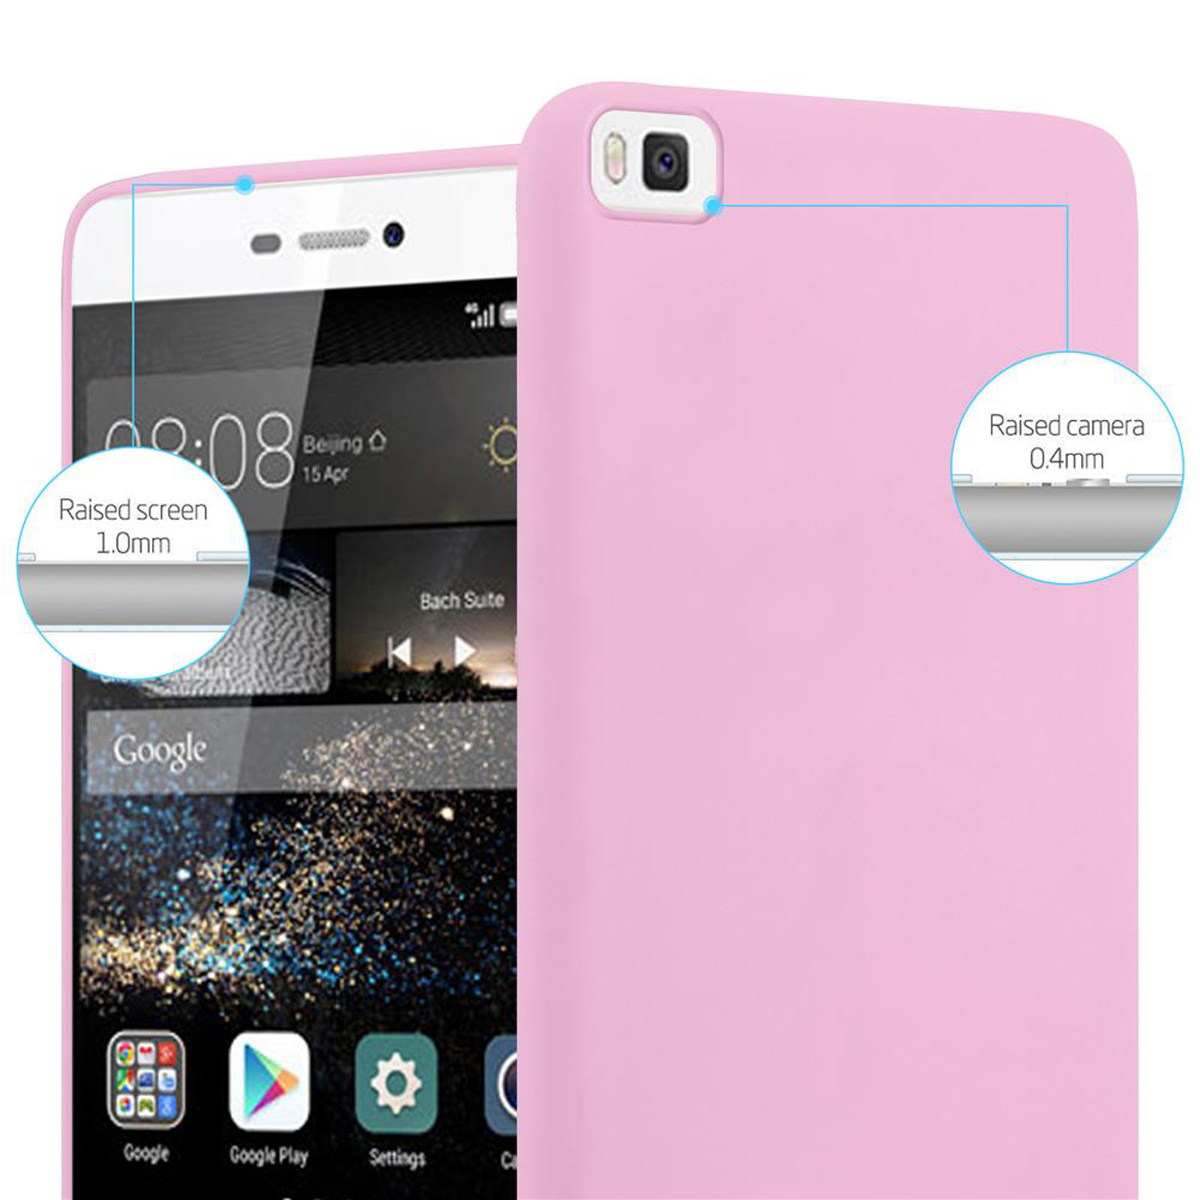 Candy ROSA Huawei, TPU im Backcover, CADORABO P8, Style, Hülle CANDY